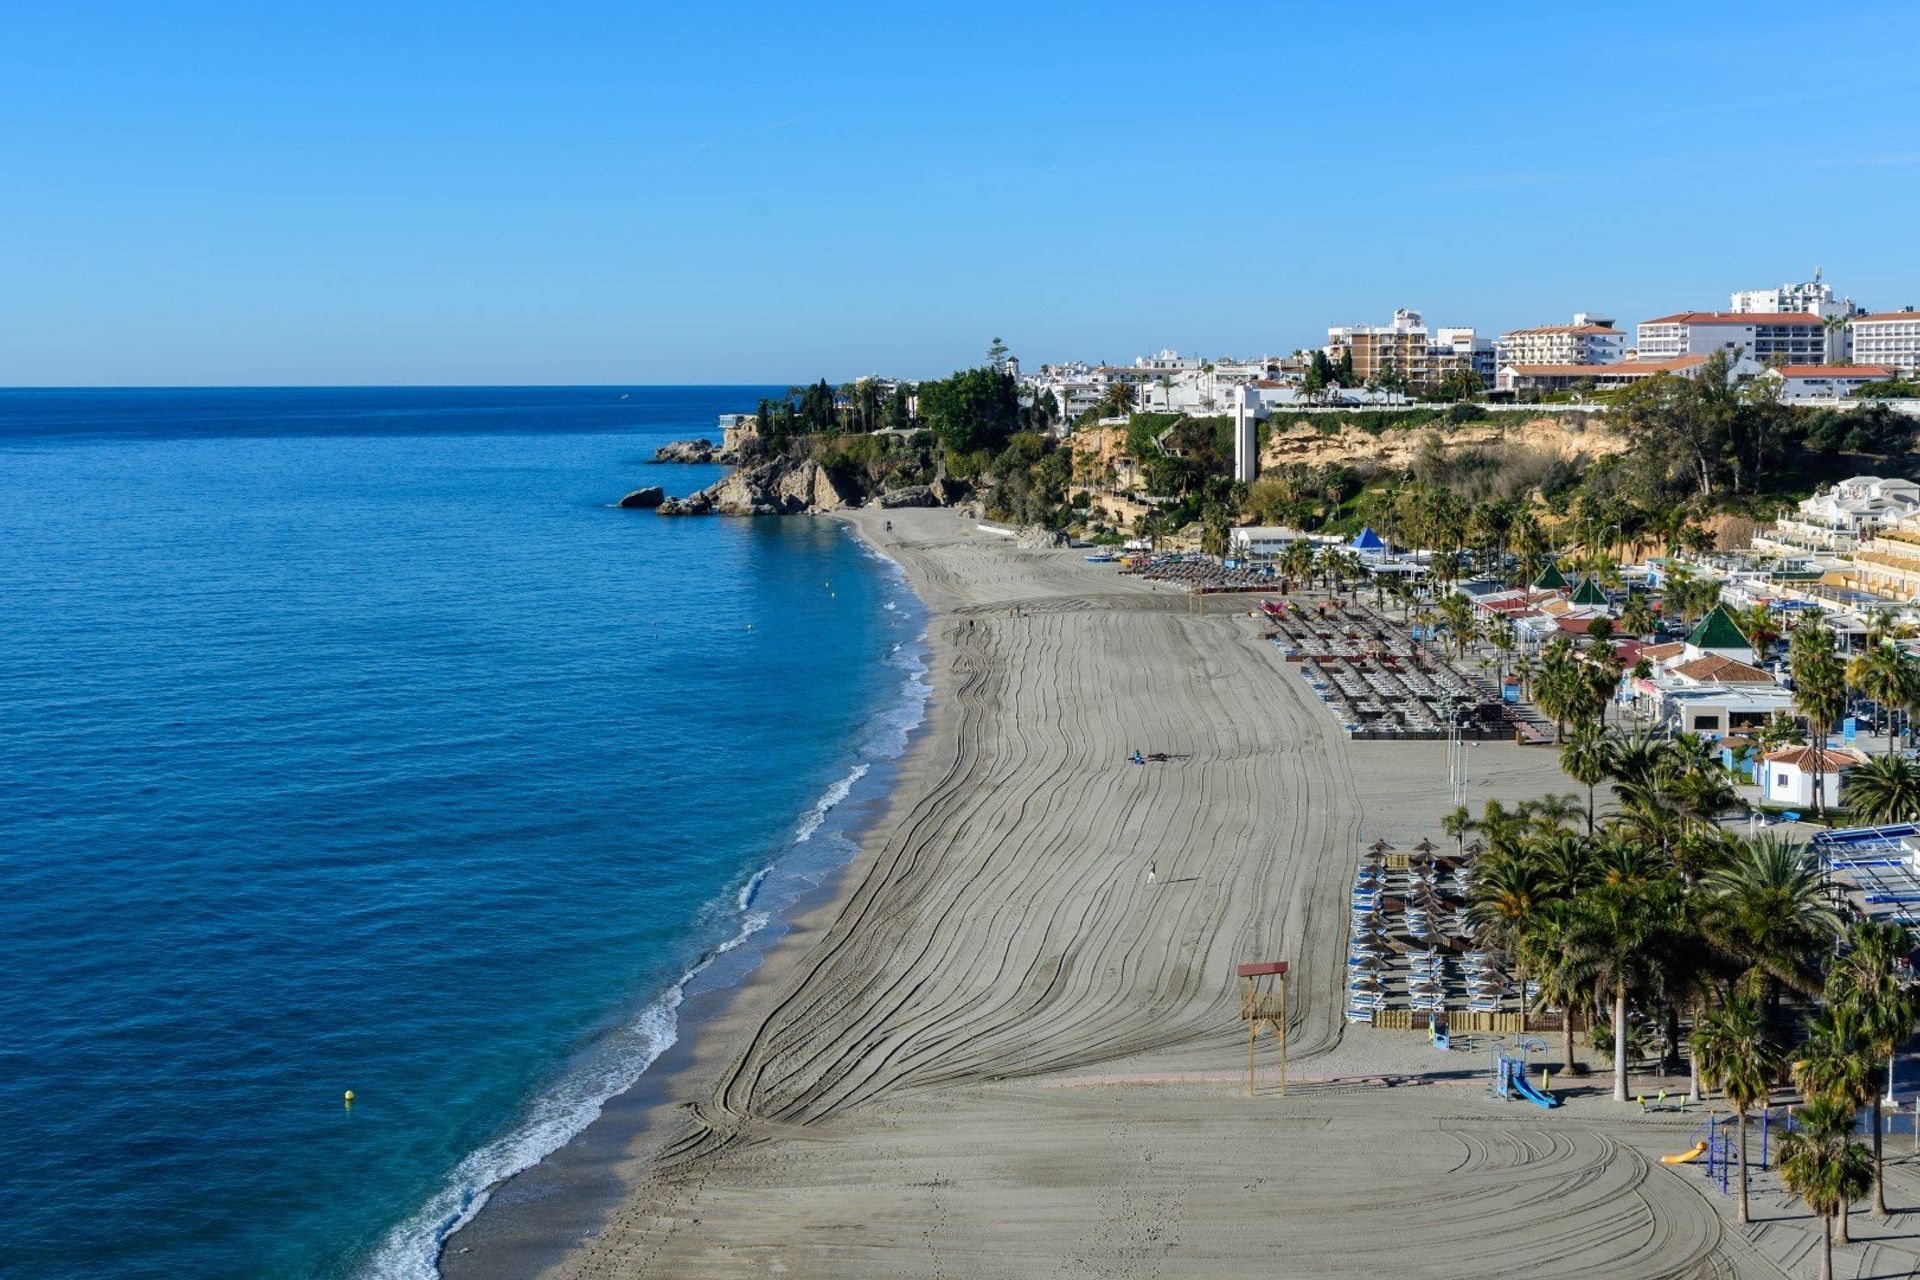 Beautiful Burriana beach with its powdery sand and aquamarine waters, 5 minutes from Nerja's centre